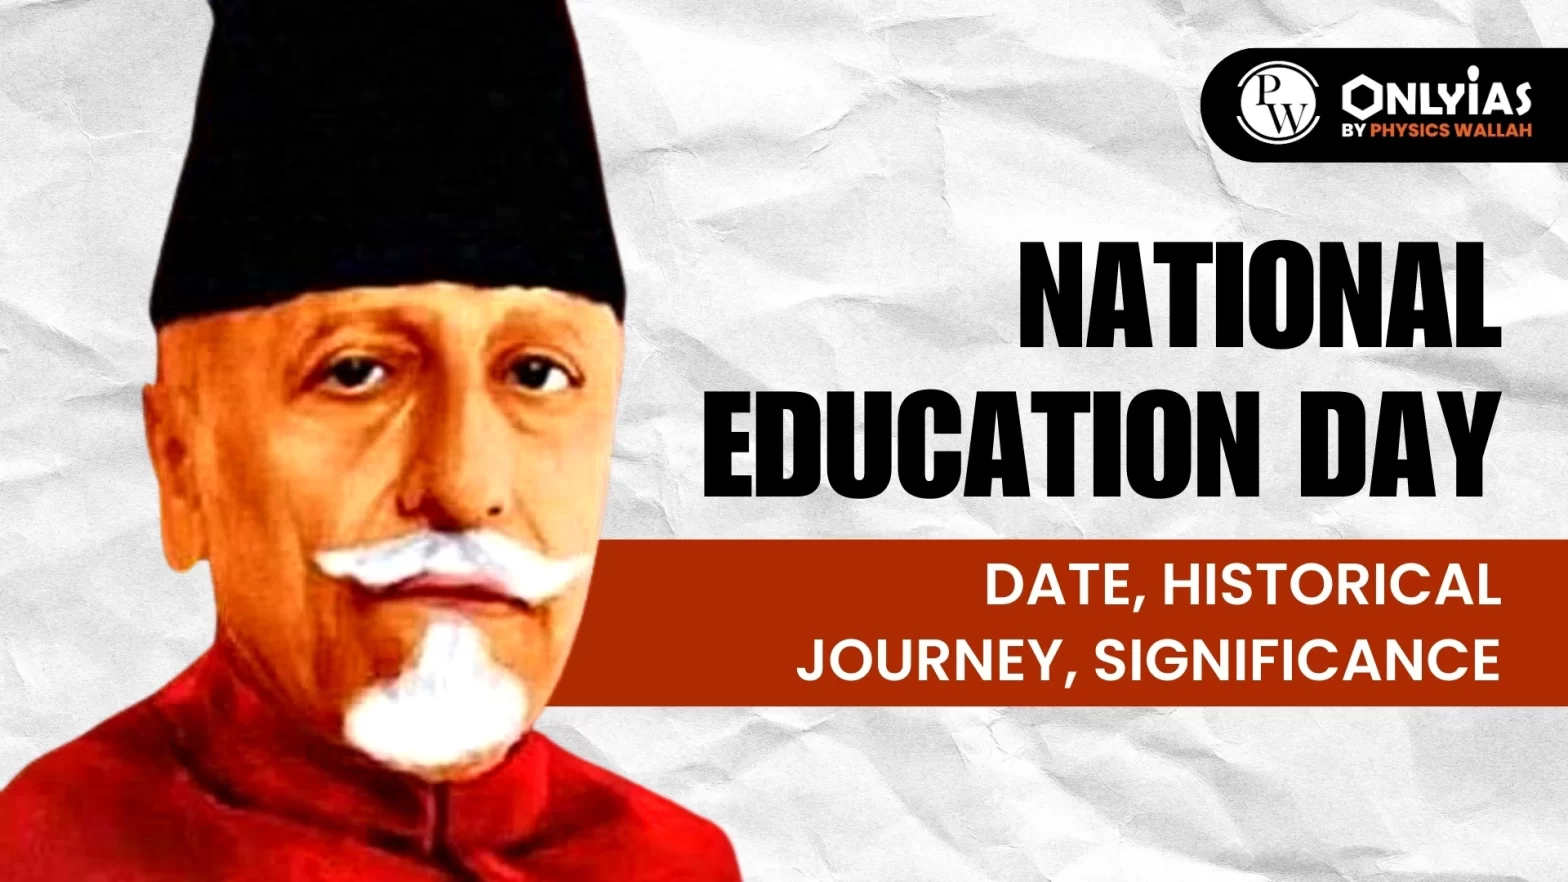 National Education Day: Date, Historical Journey, Significance